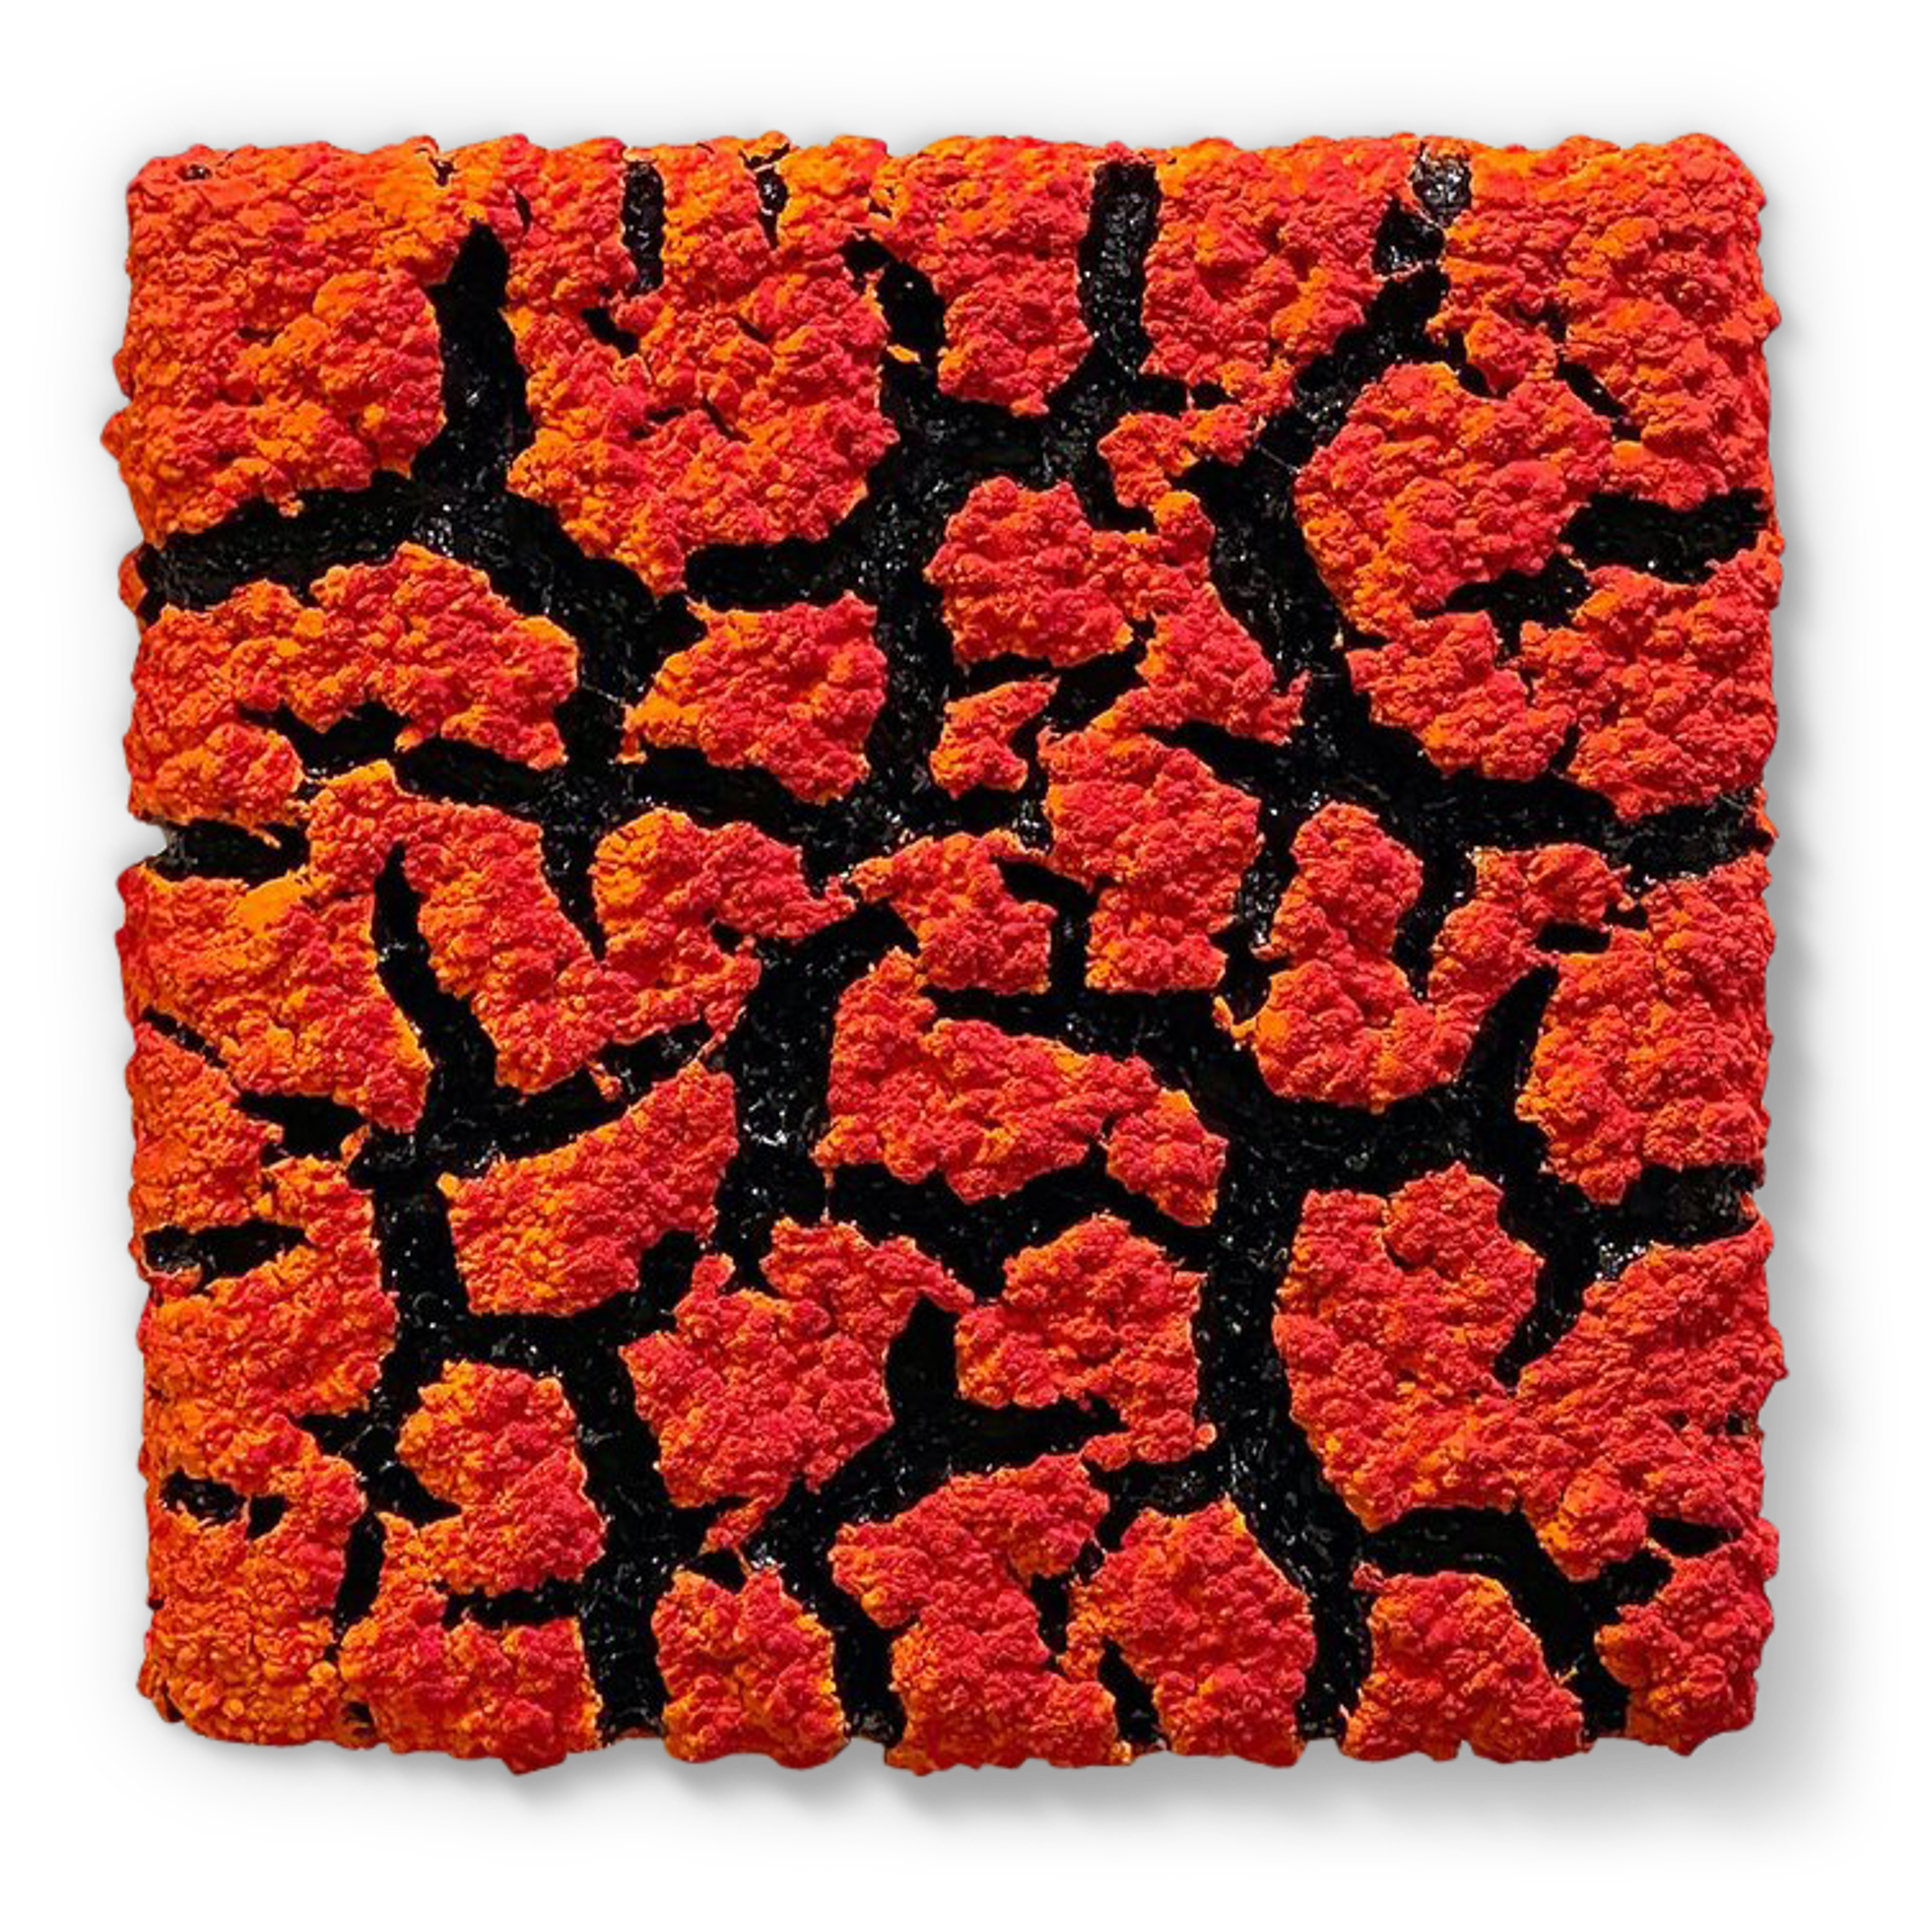 Orange & Red Lichen Wall Piece (Other colors can be ordered) by Randy O'Brien